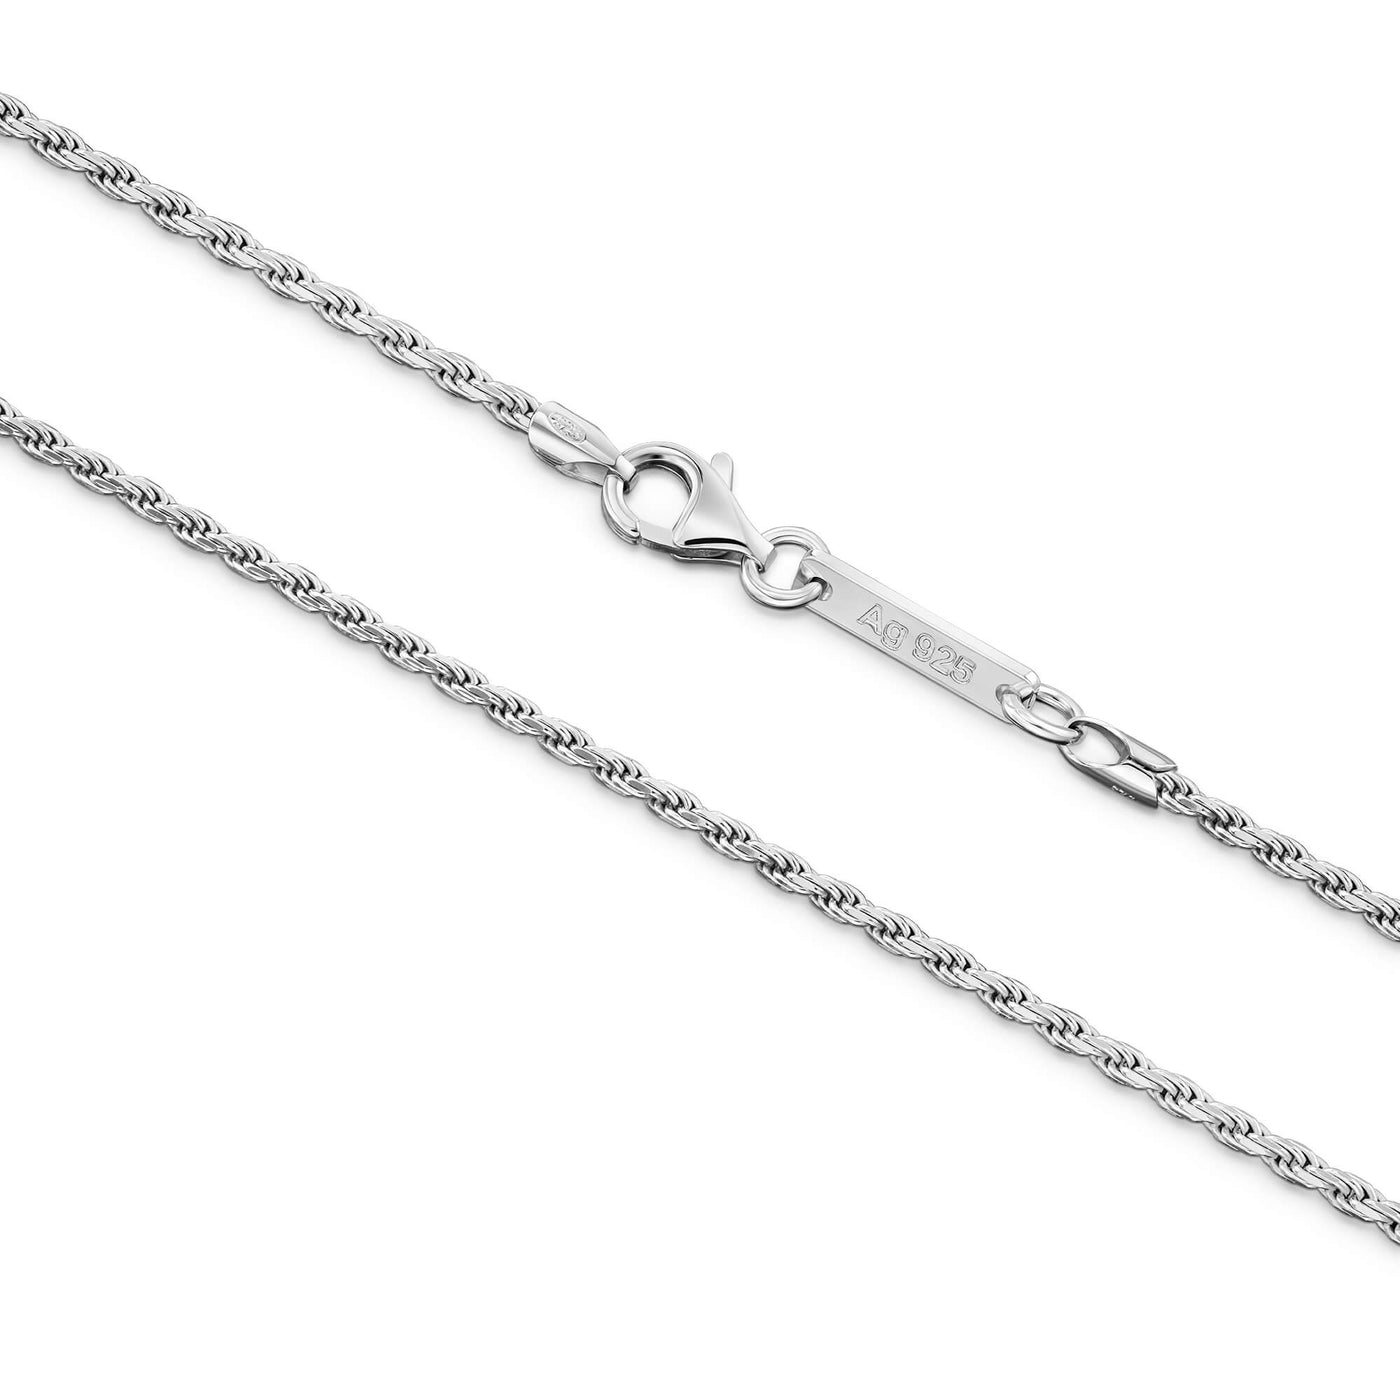 CORD CHAIN BRACELET 925 SILVER RHODIUM PLATED 2.00MM